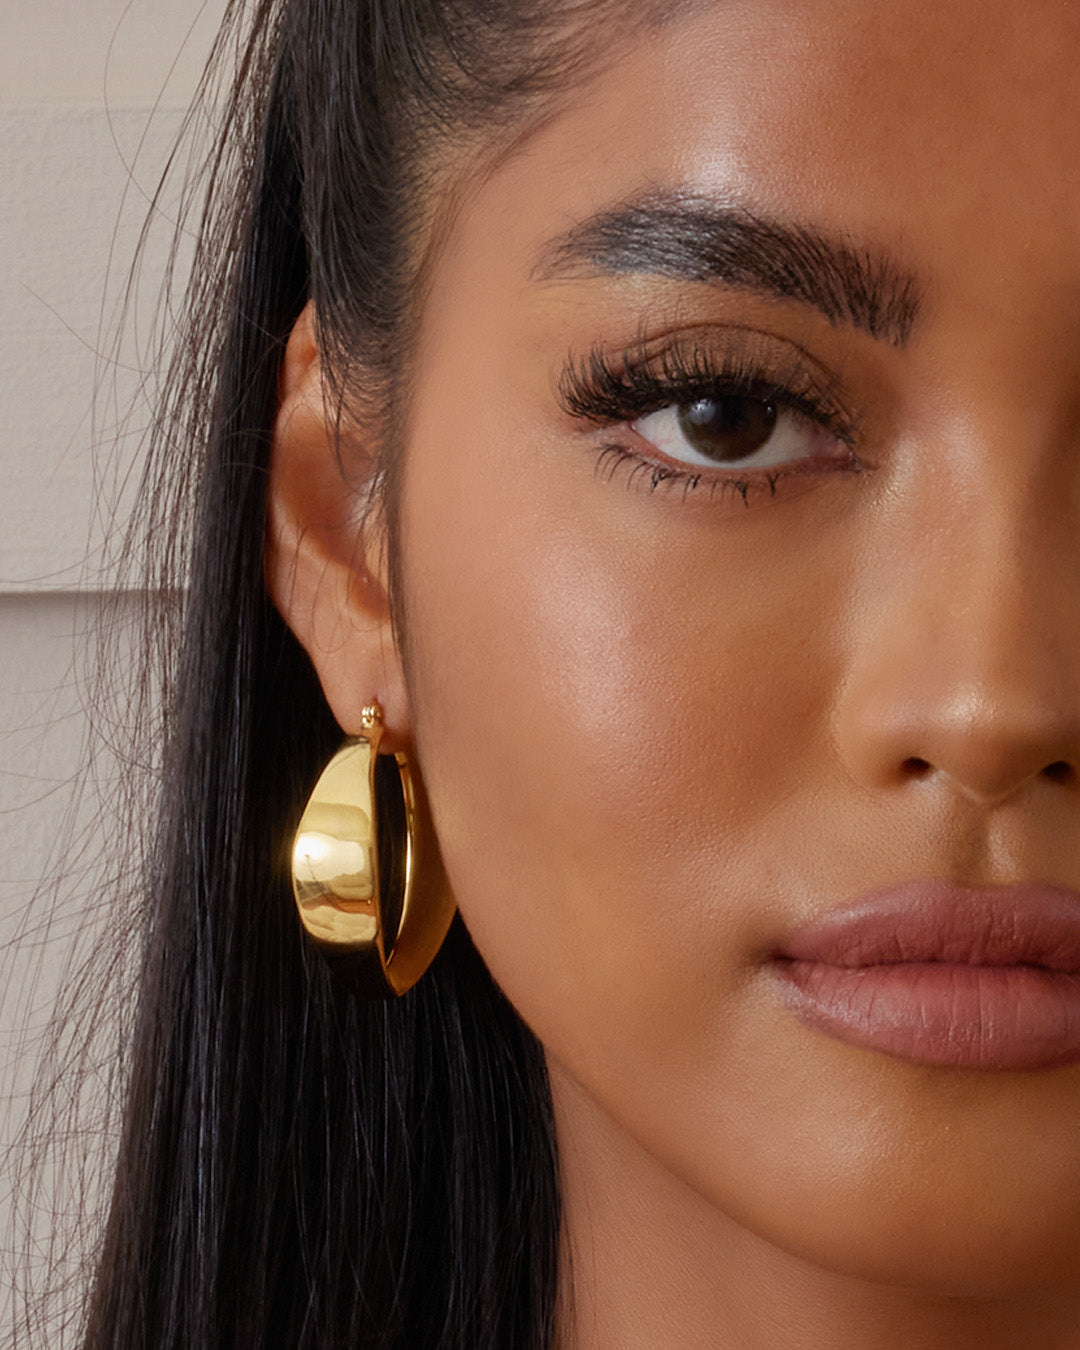 This is the product picture of chunky hoop earrings plated in gold in sterling silver material